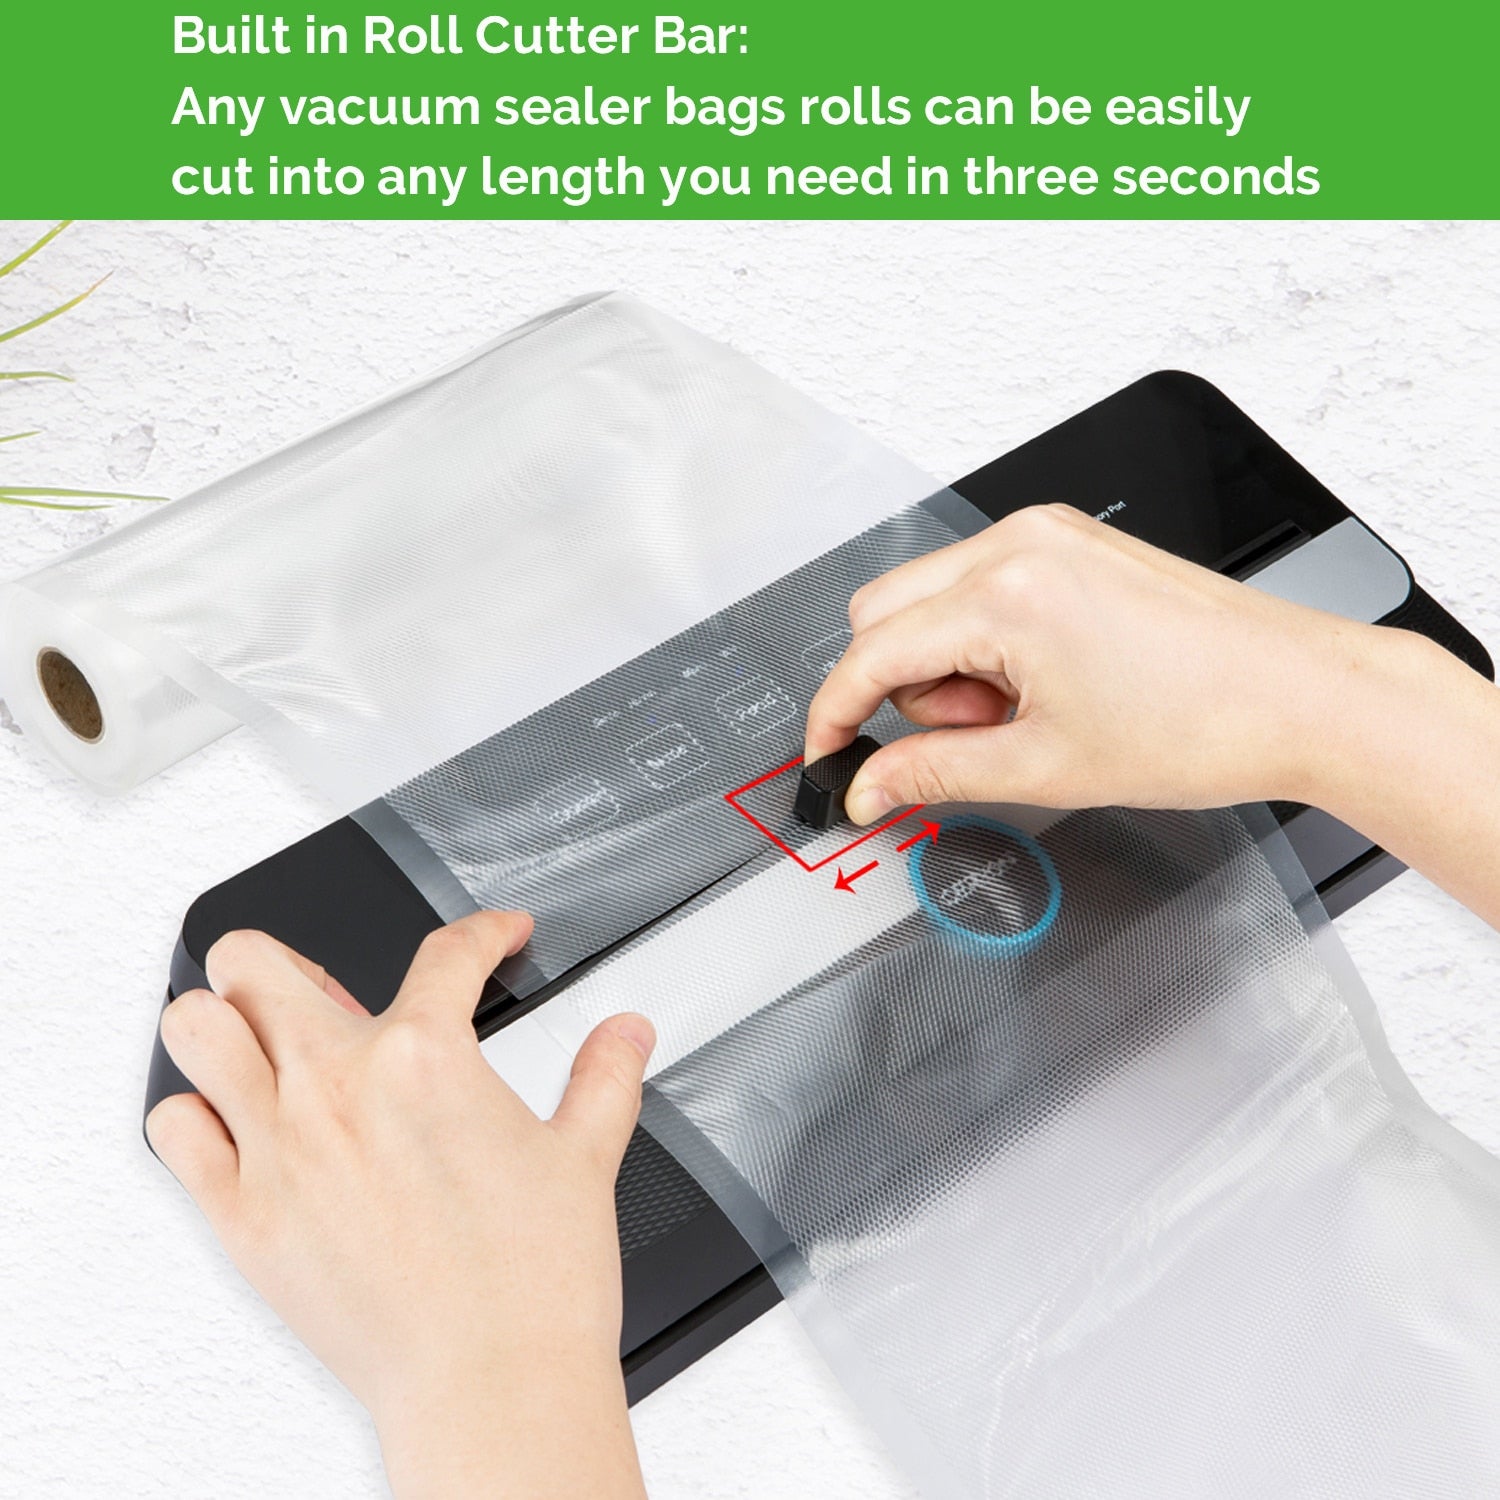 explaining the built in roll cutter feature on the Automatic Vacuum Sealer which can cut your packaging at its desired length